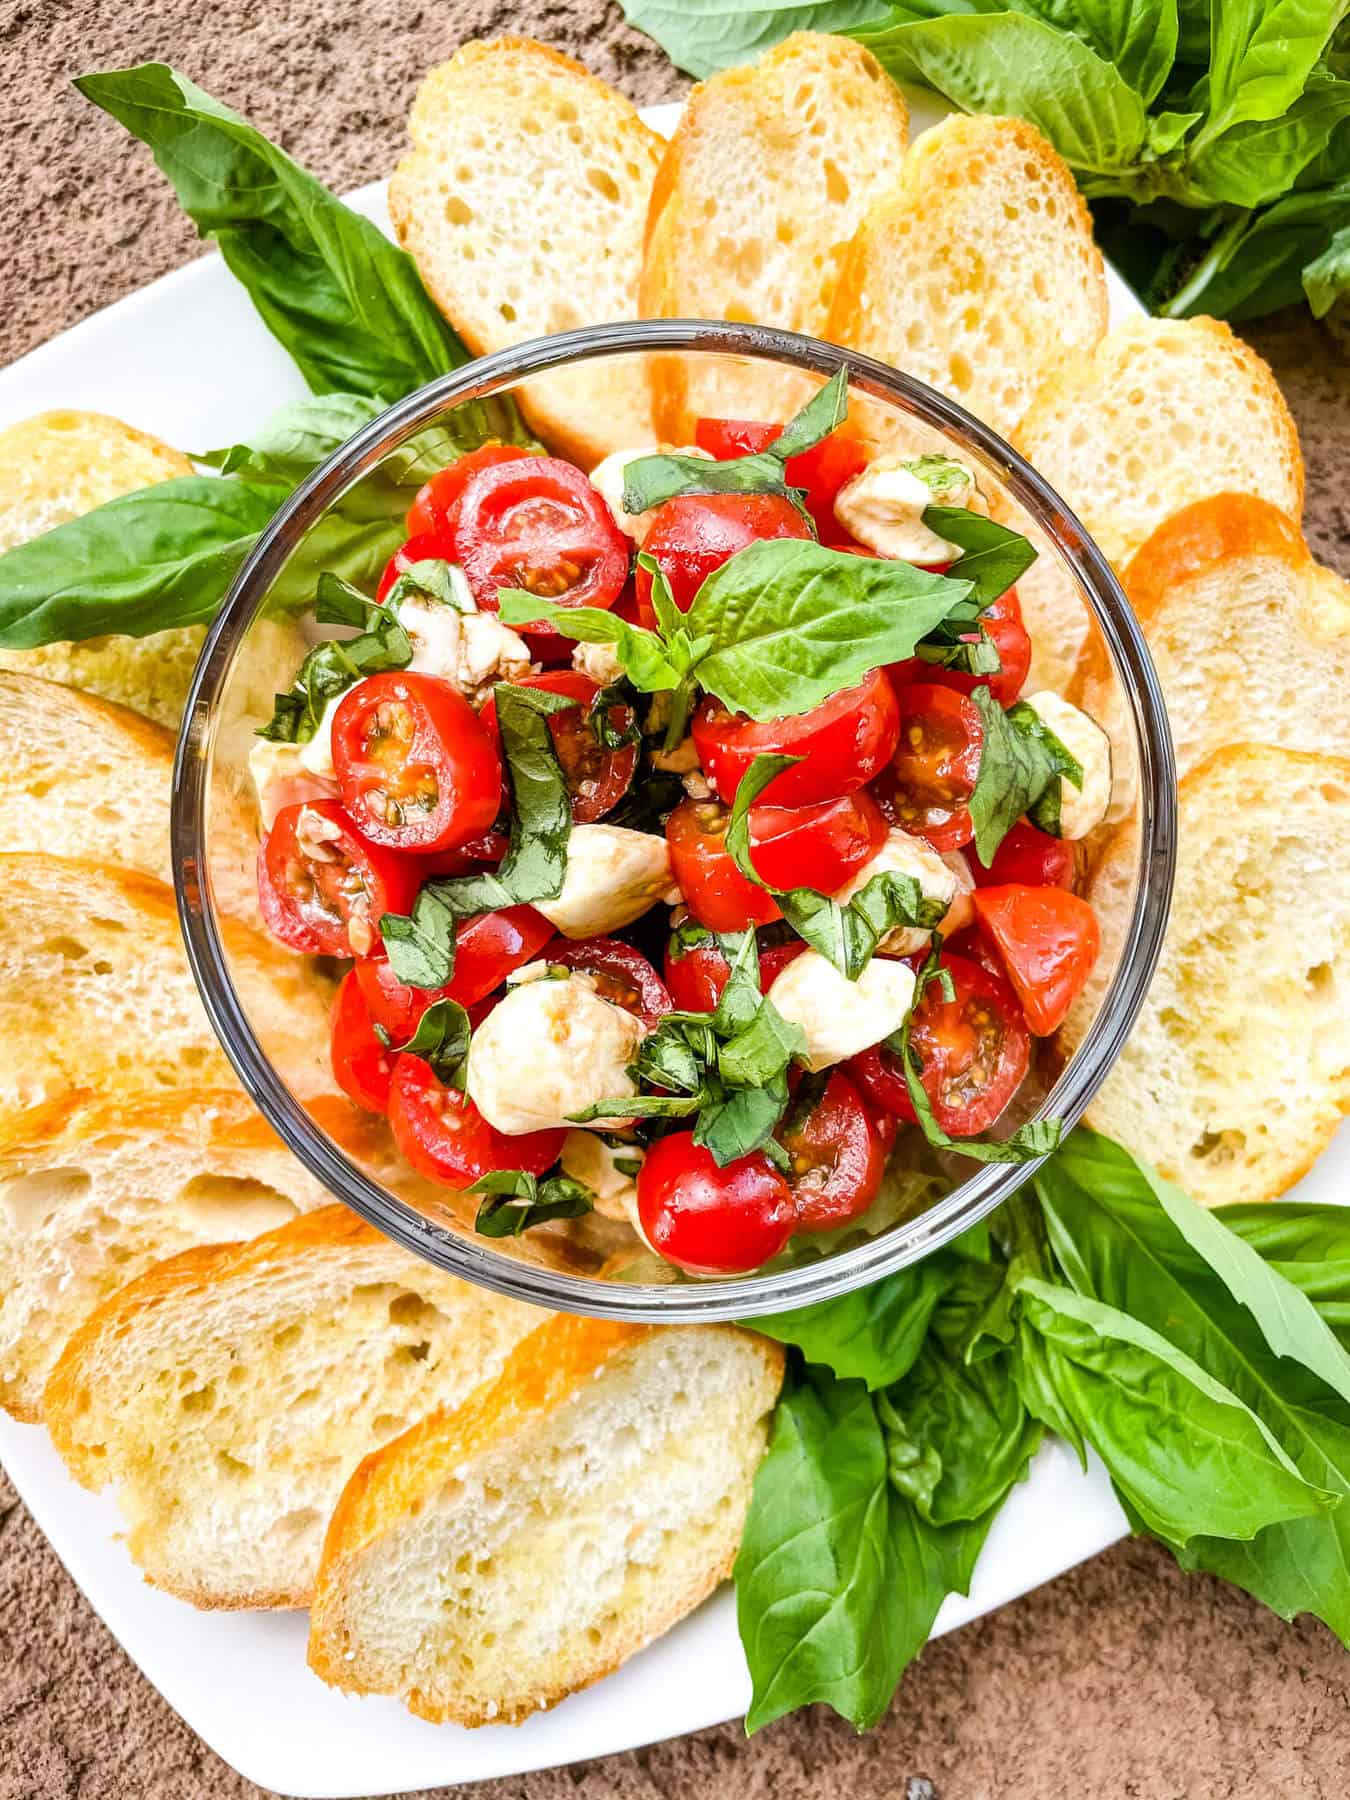 A bowl of the topping with bread and basil around it on a plate